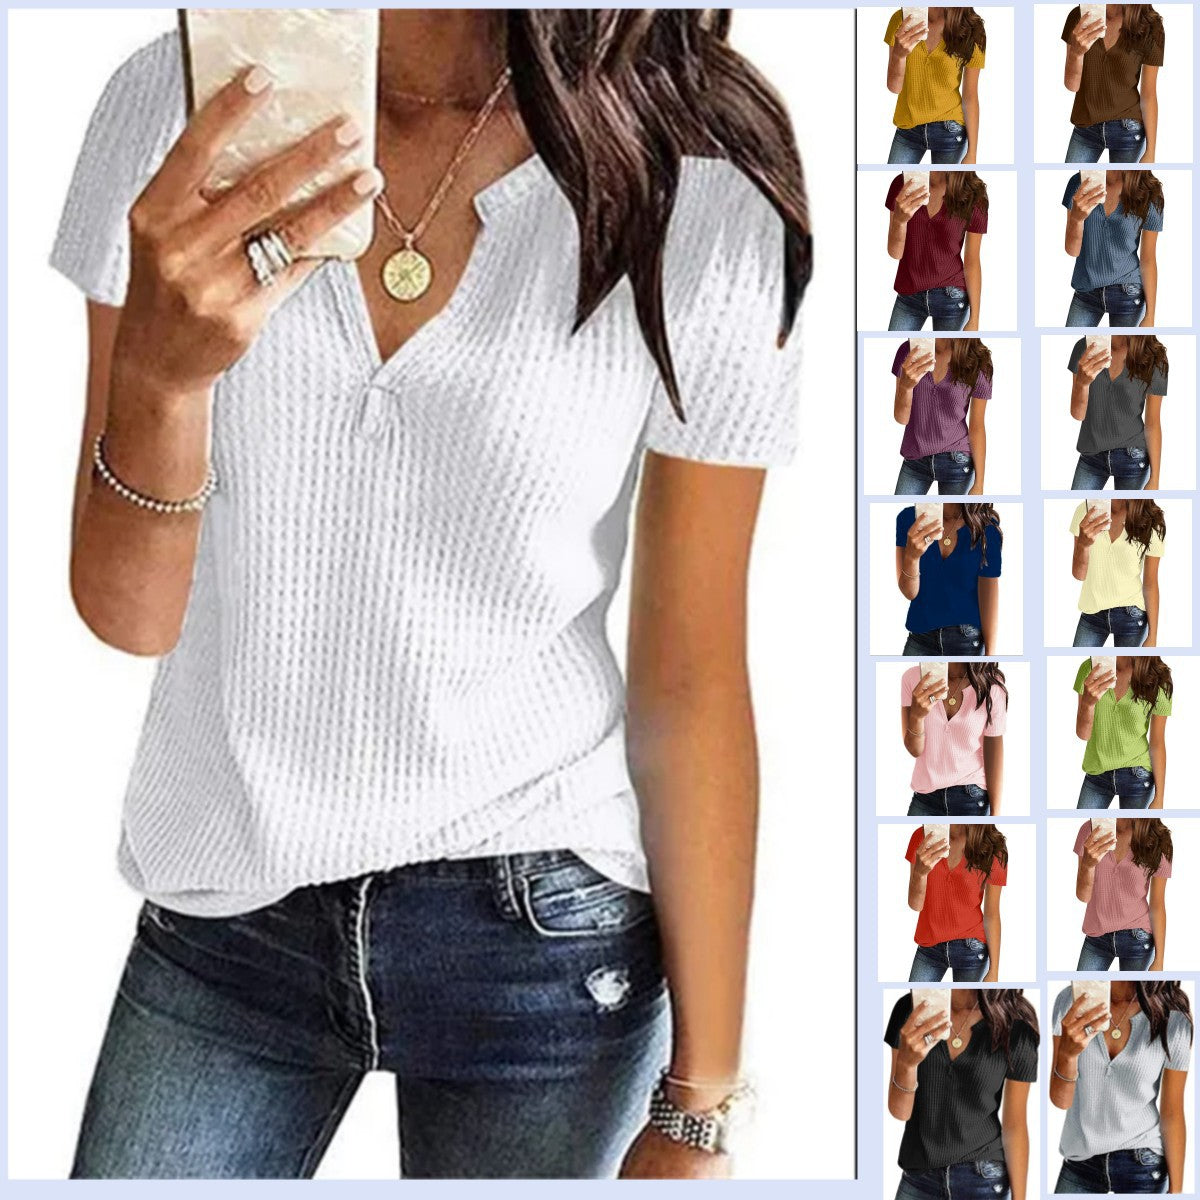 Women's Clothes Mid-length Loose Casual Sleeved T-shirt Tops